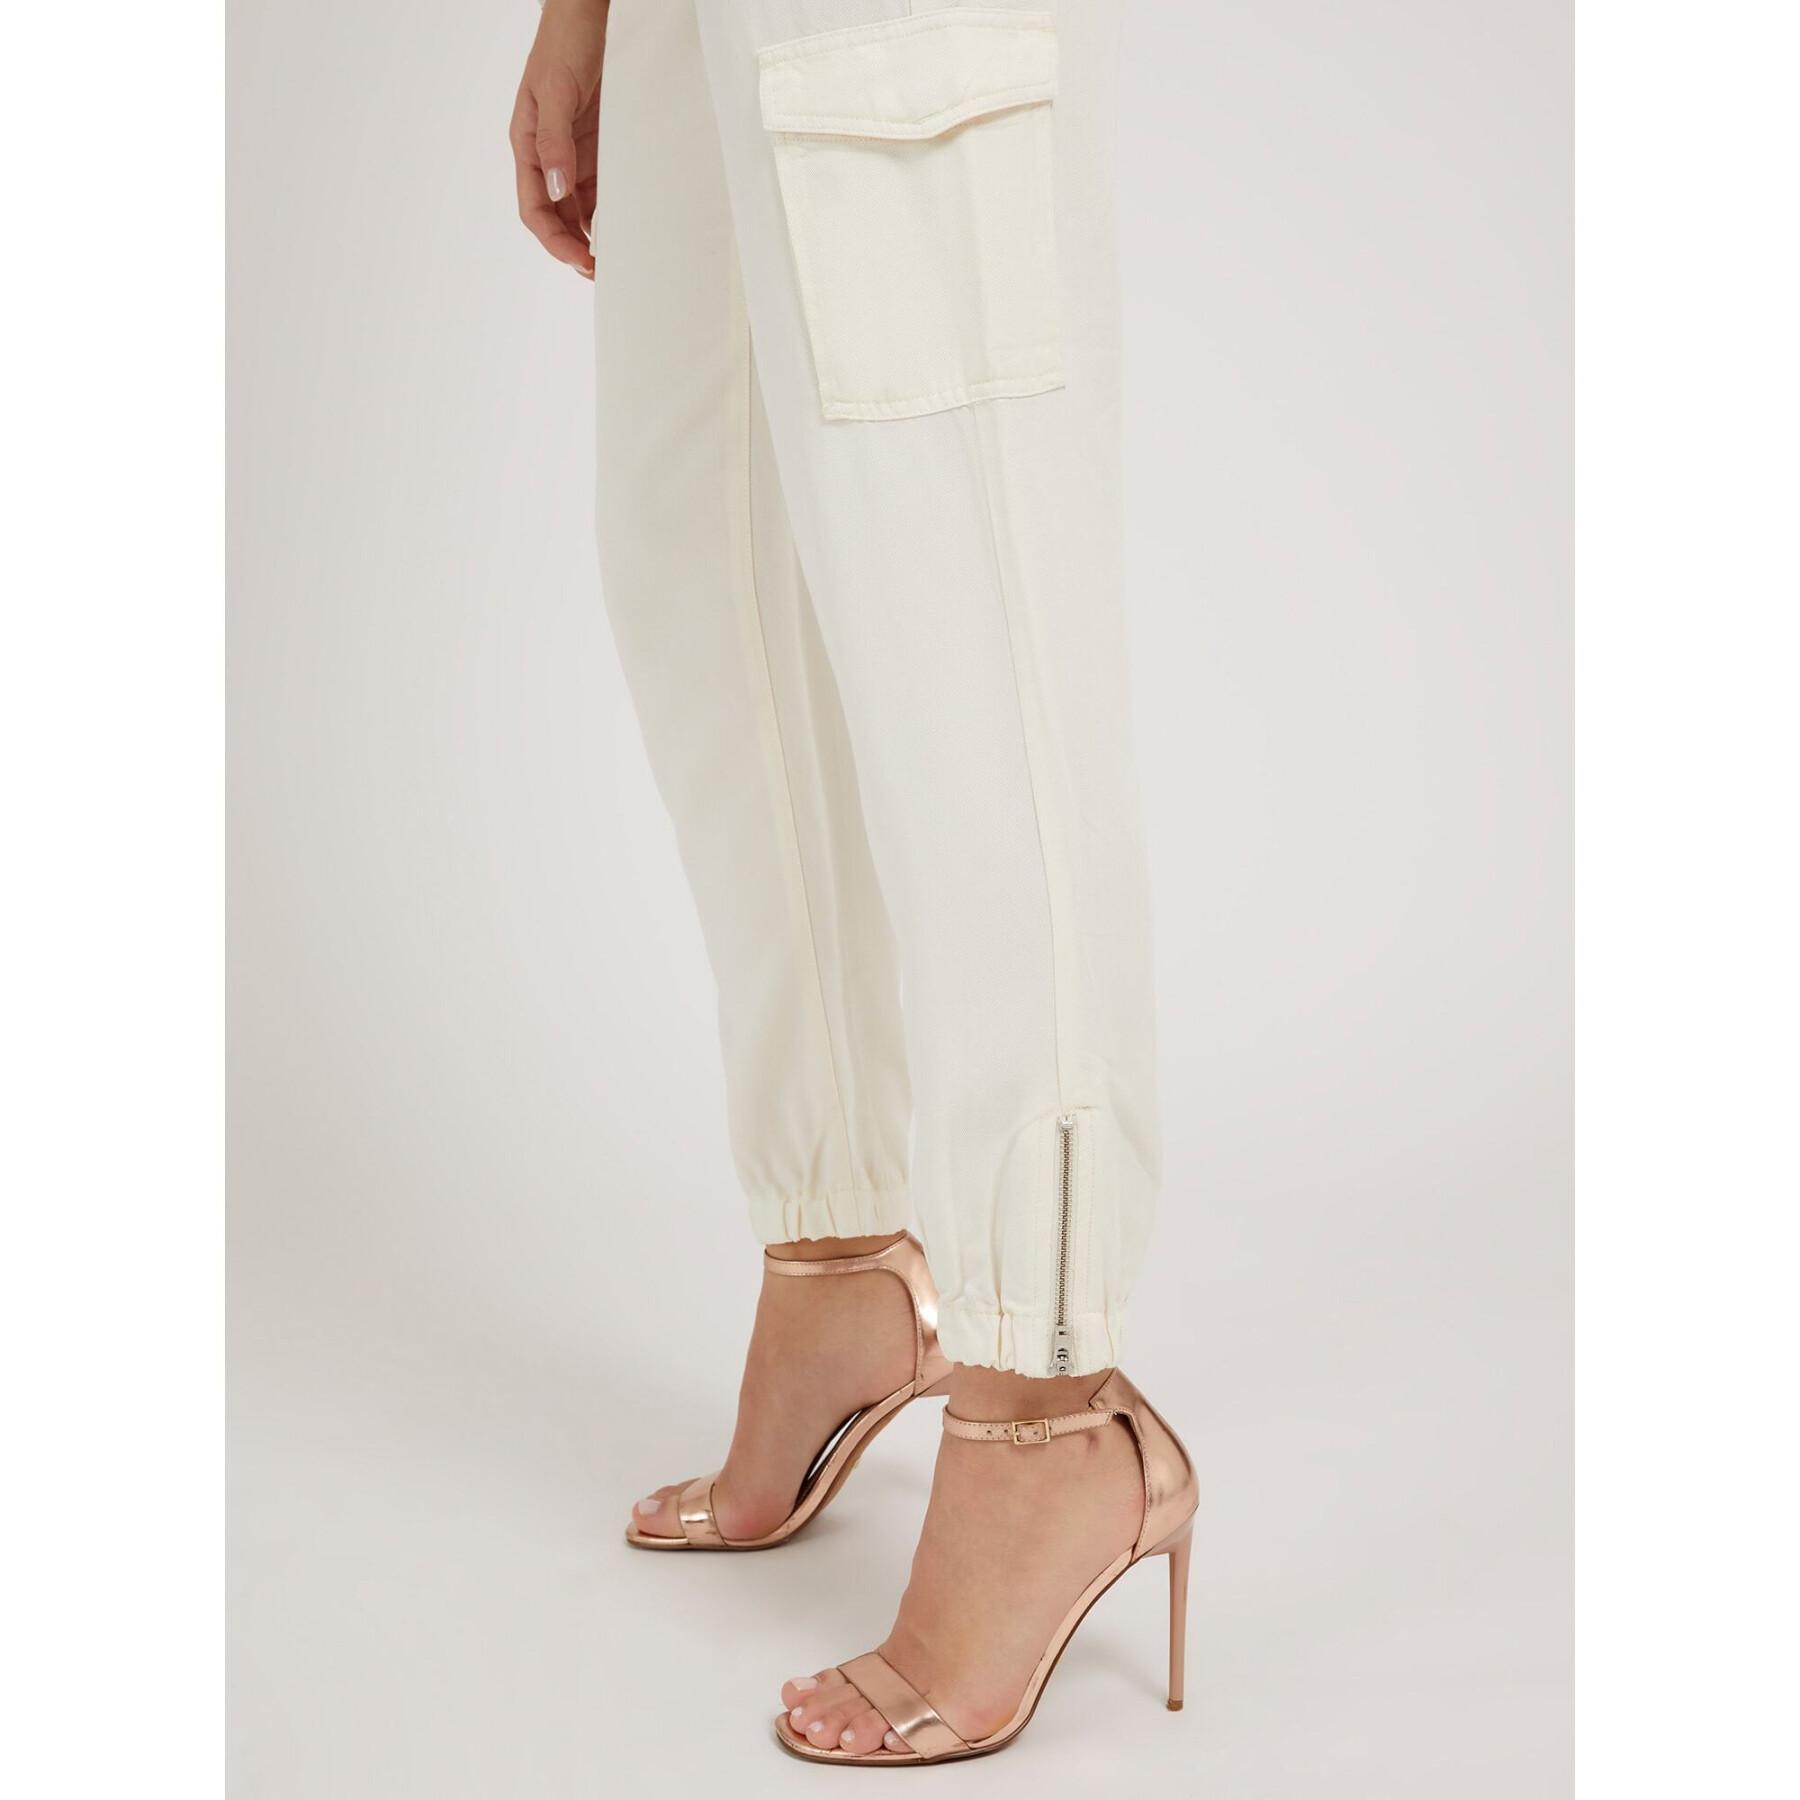 Pantaloni cargo chino femme Guess Es Bowie